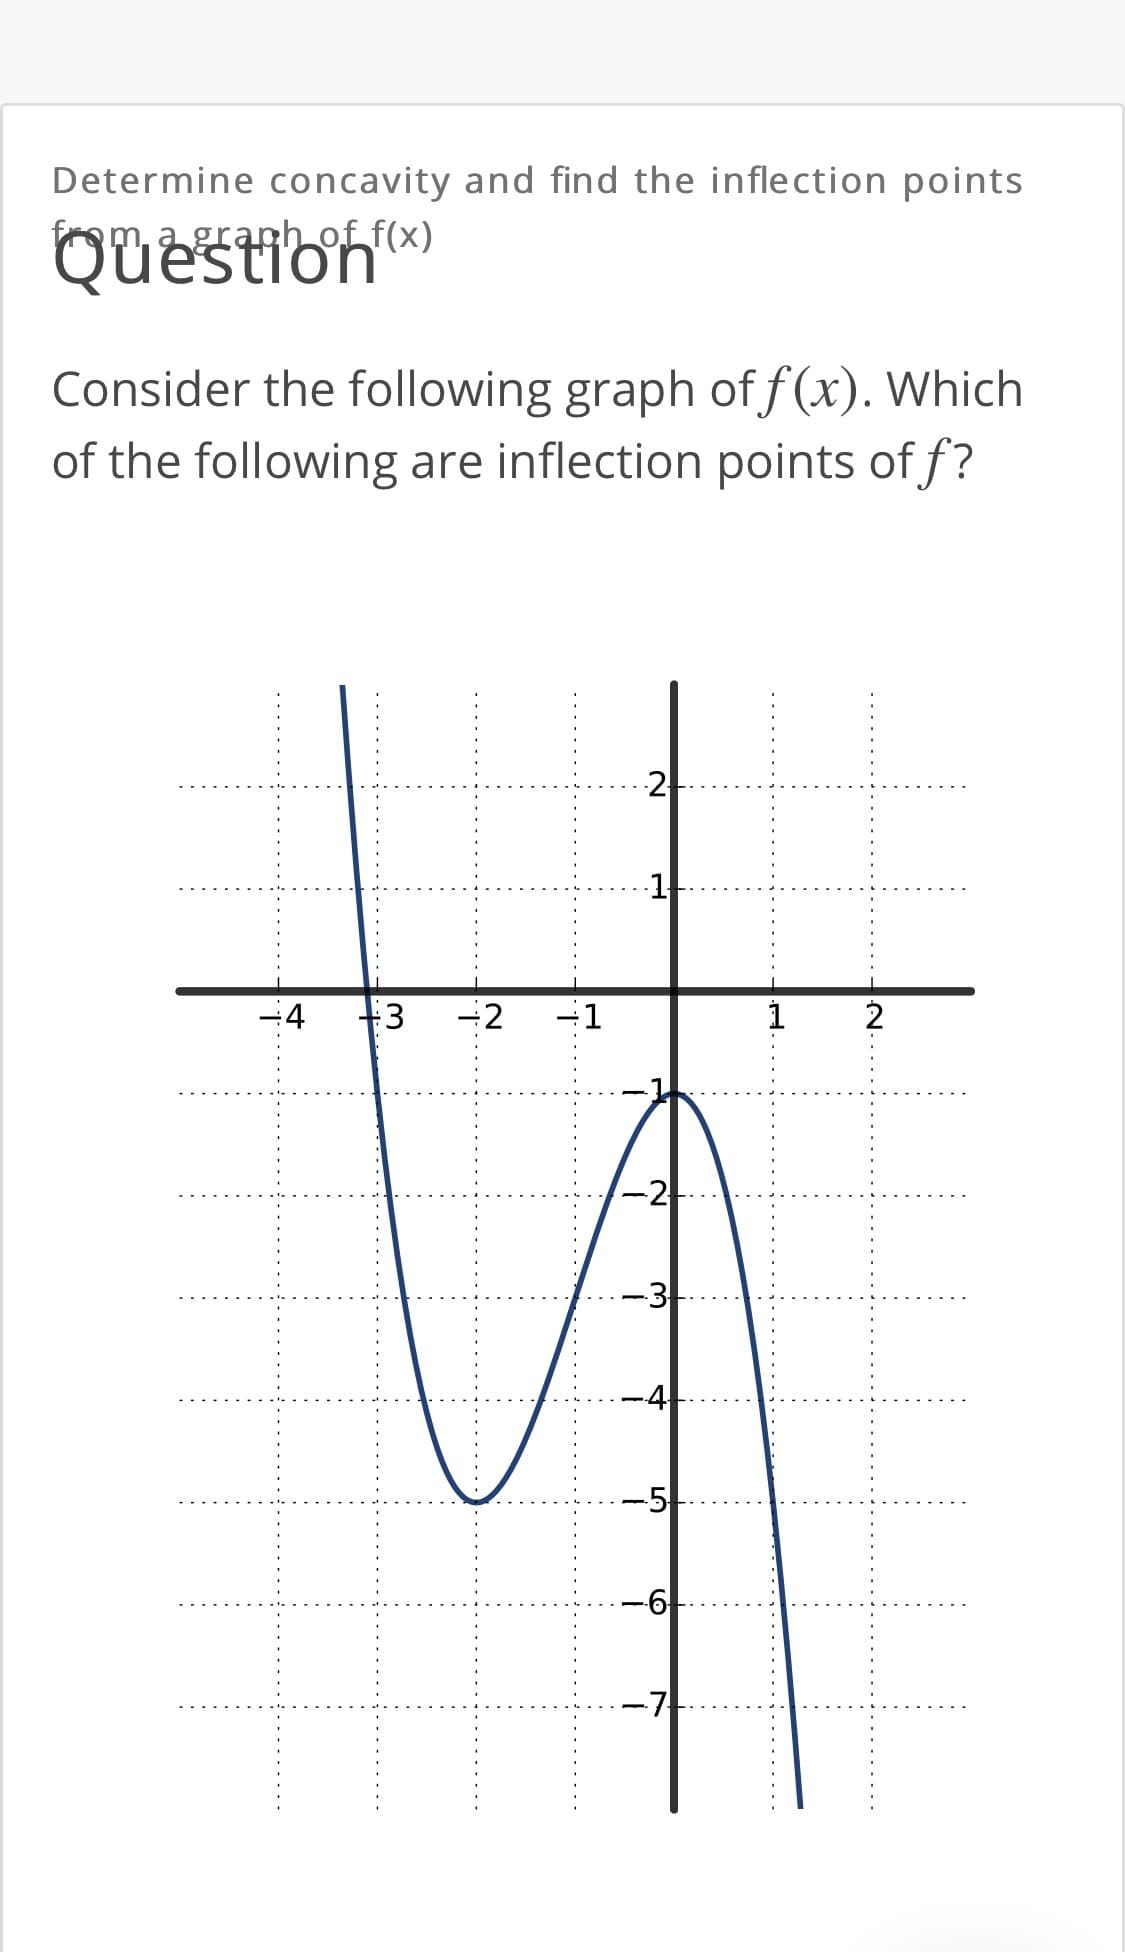 Determine concavity and find the inflection points
Question
frem, a graph of f(x)
Consider the following graph of f (x). Which
of the following are inflection points of f?
-4
:3
-2
-1
-2
.4
-5
-7
6.
